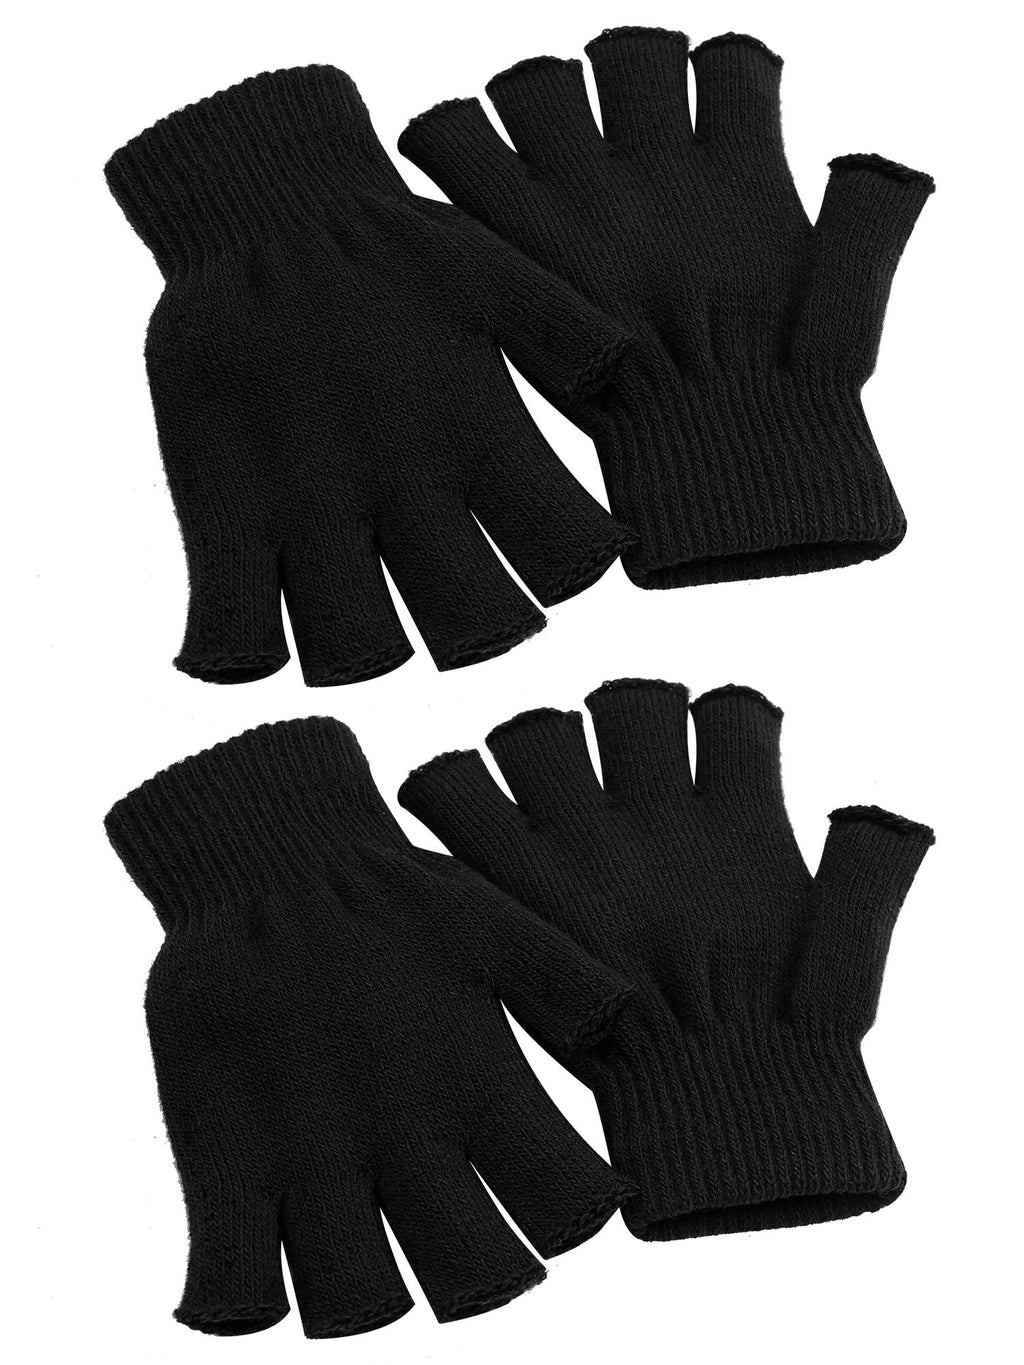 [Australia] - Cooraby 2 Pairs Unisex Warm Half Finger Gloves Winter Fingerless Gloves (L for Adults, M for Teens, S for Kids) Black L 